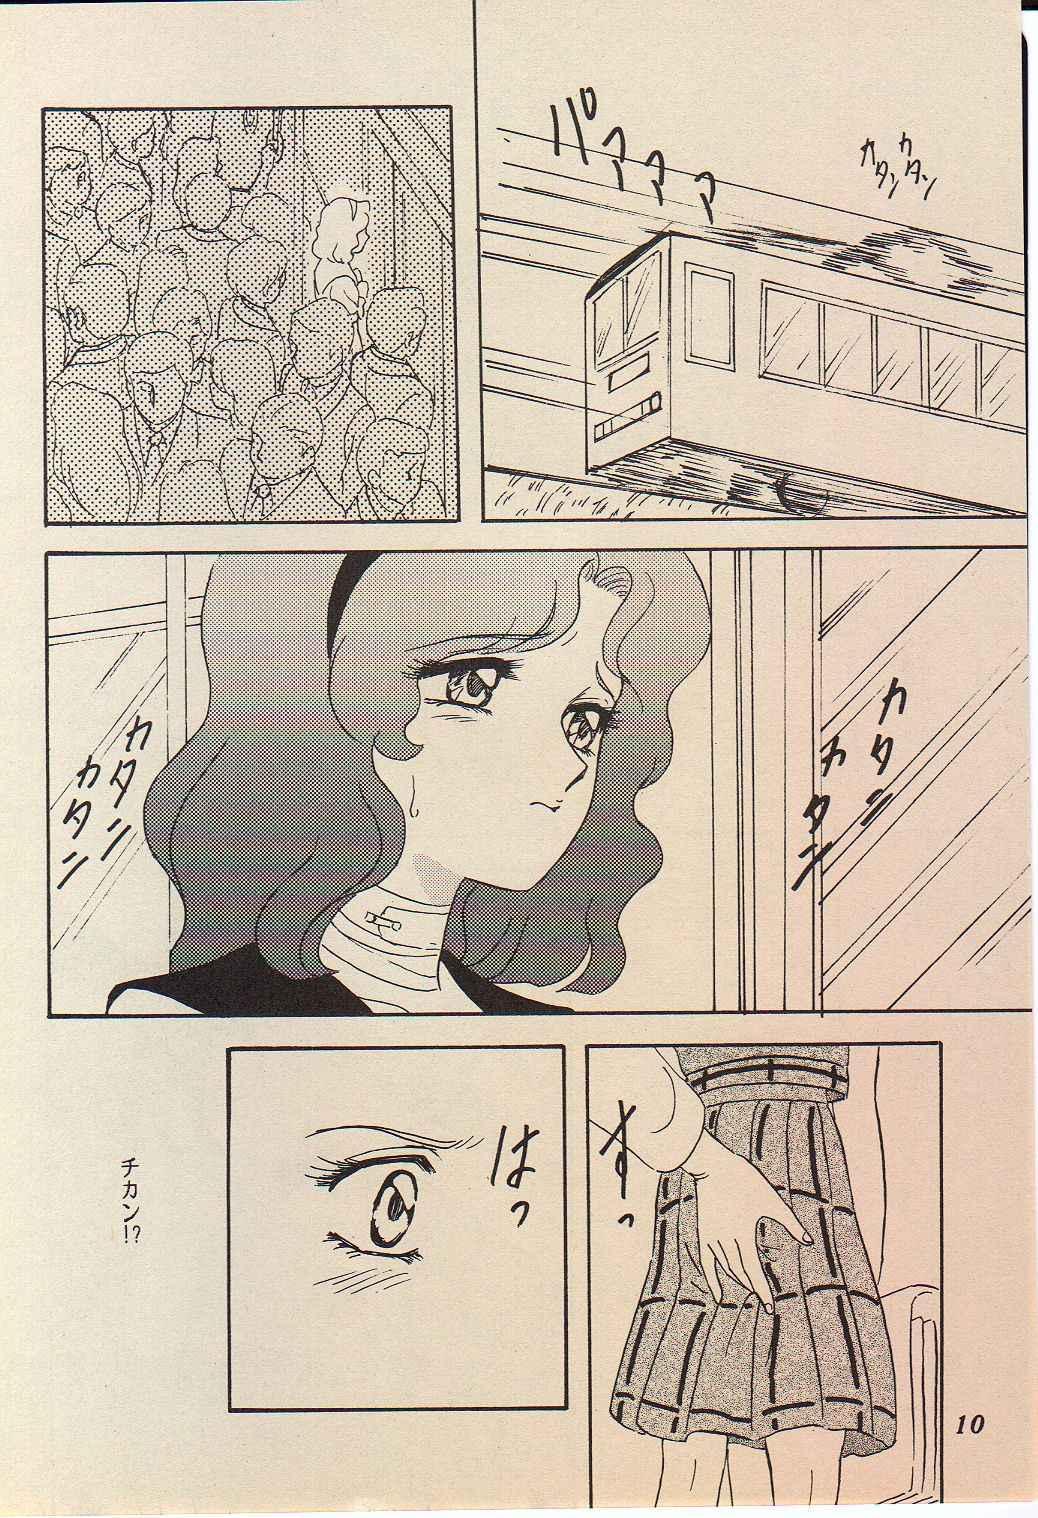 Pussy Fingering Lunch Box 11 - Twinkle Twinkle - Sailor moon Putinha - Page 9